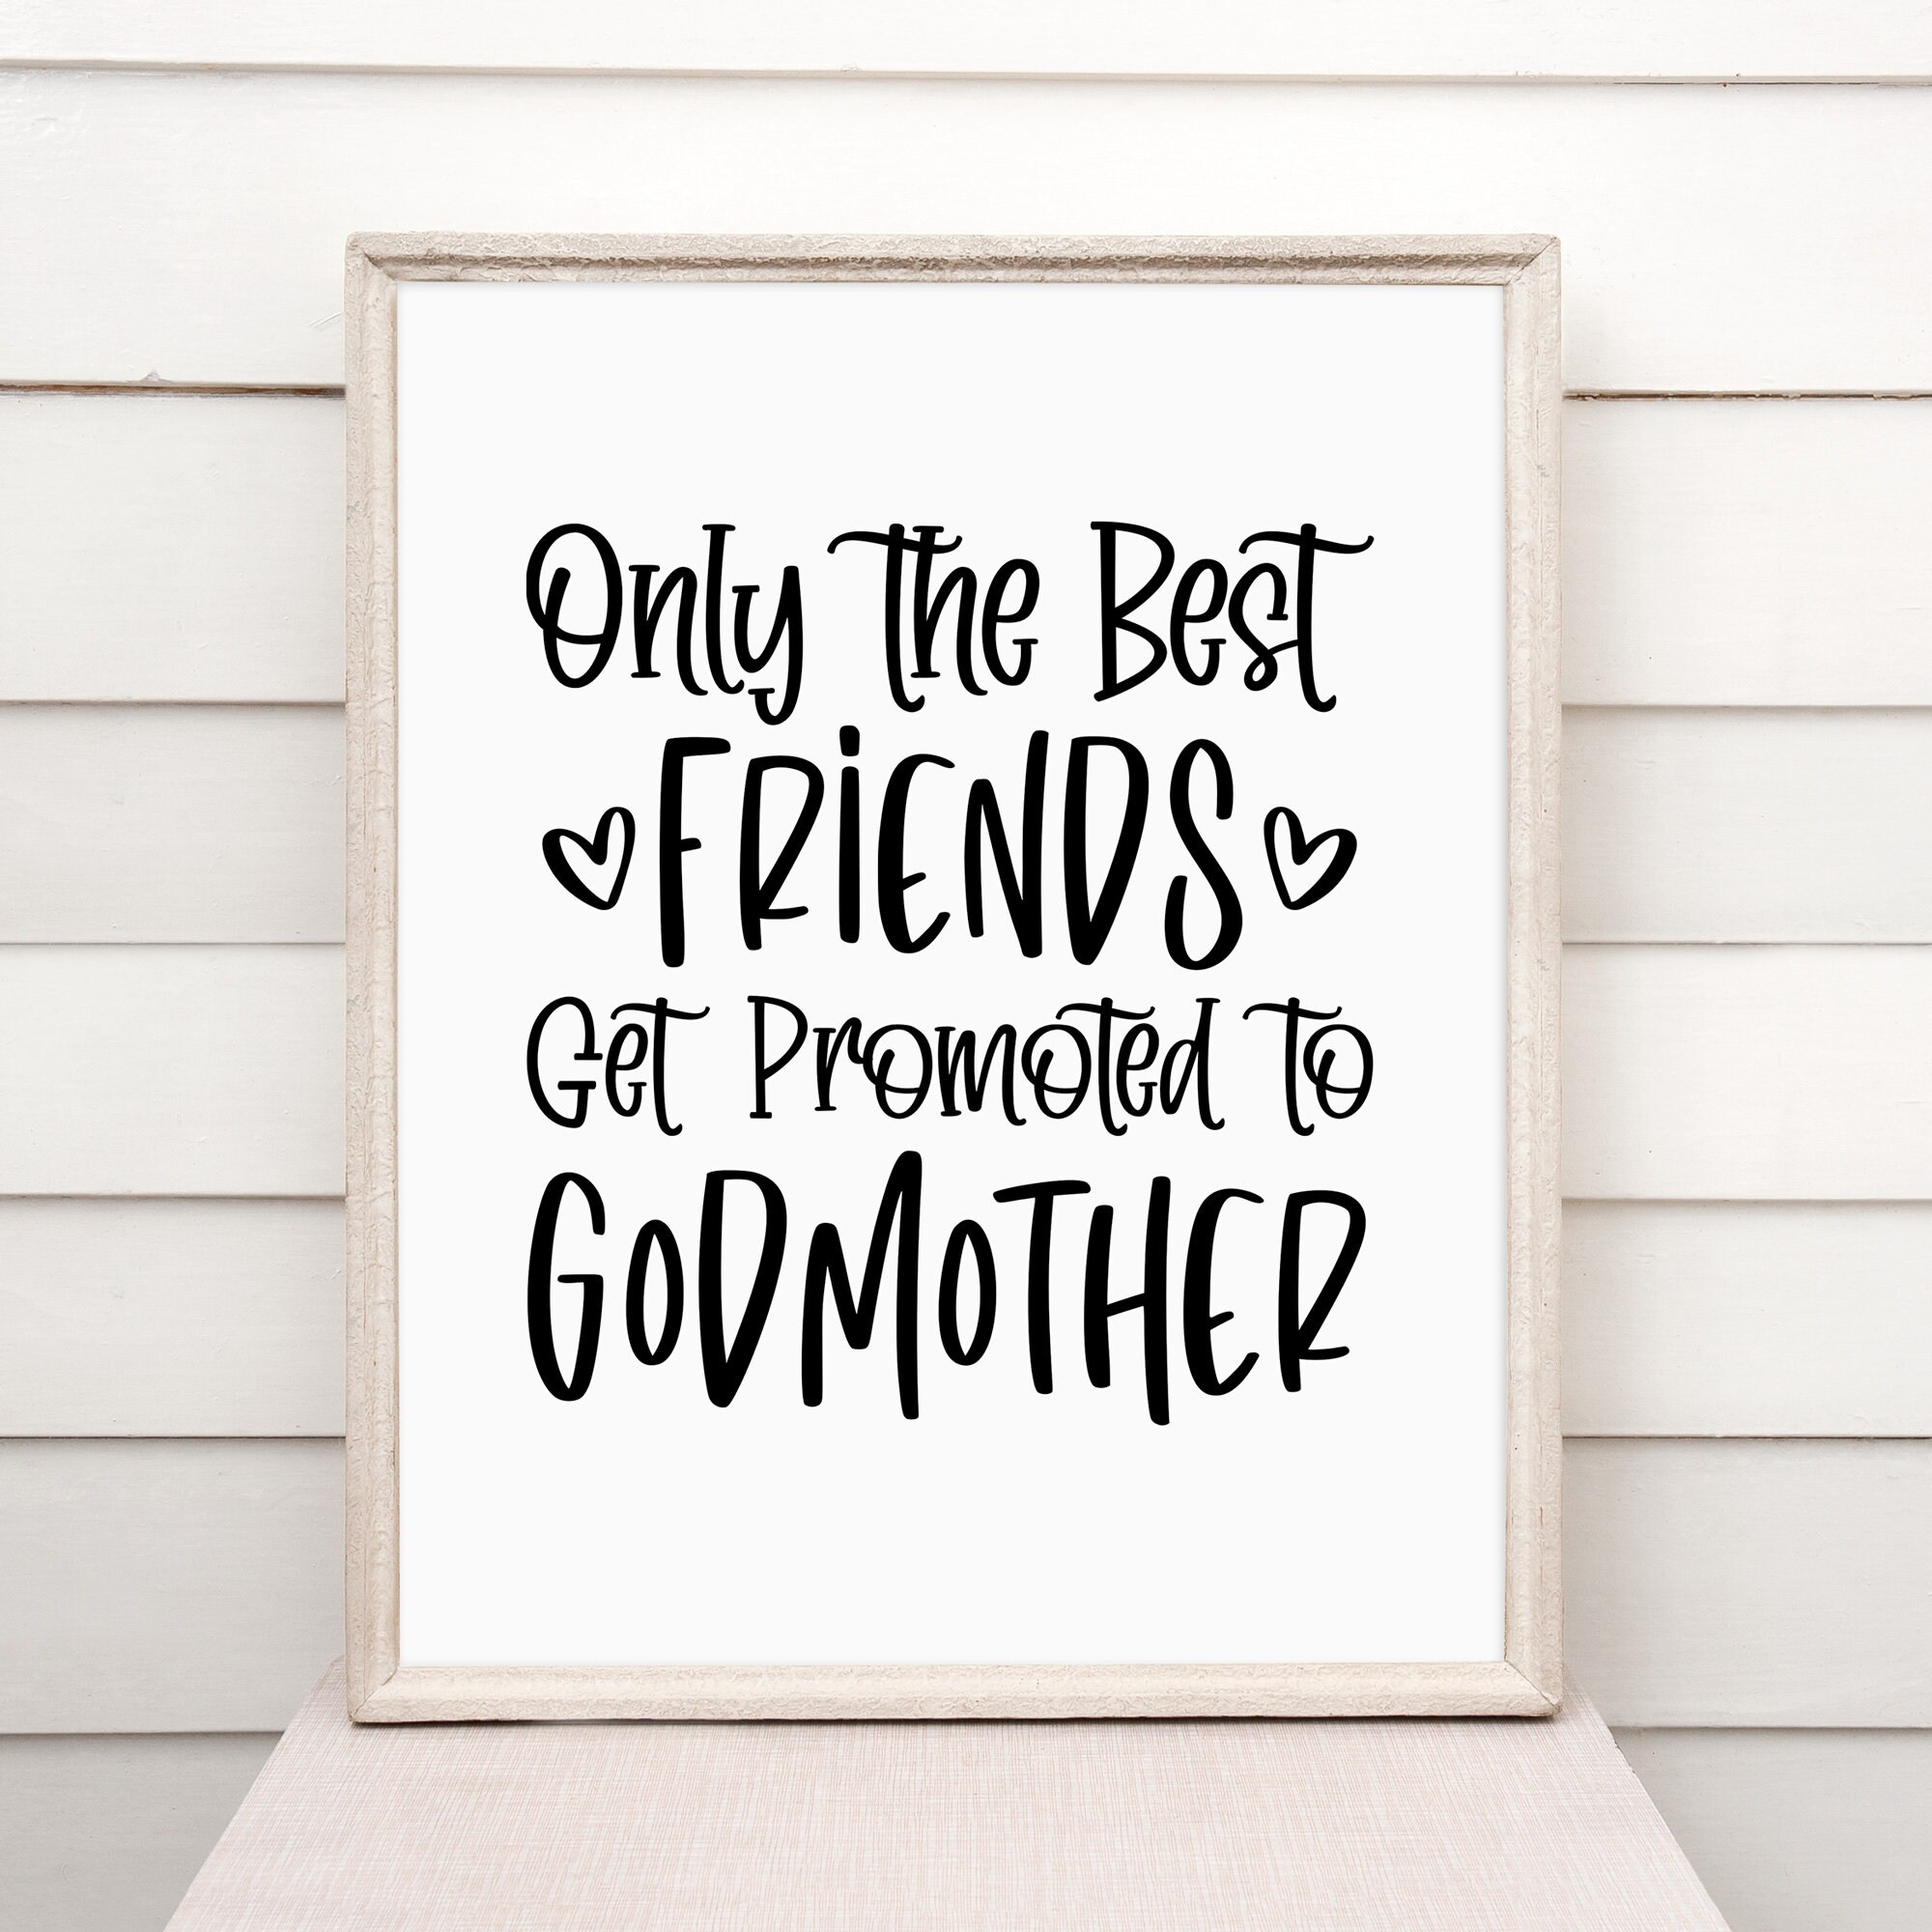 Only the best friends get promoted to god mothers   decals